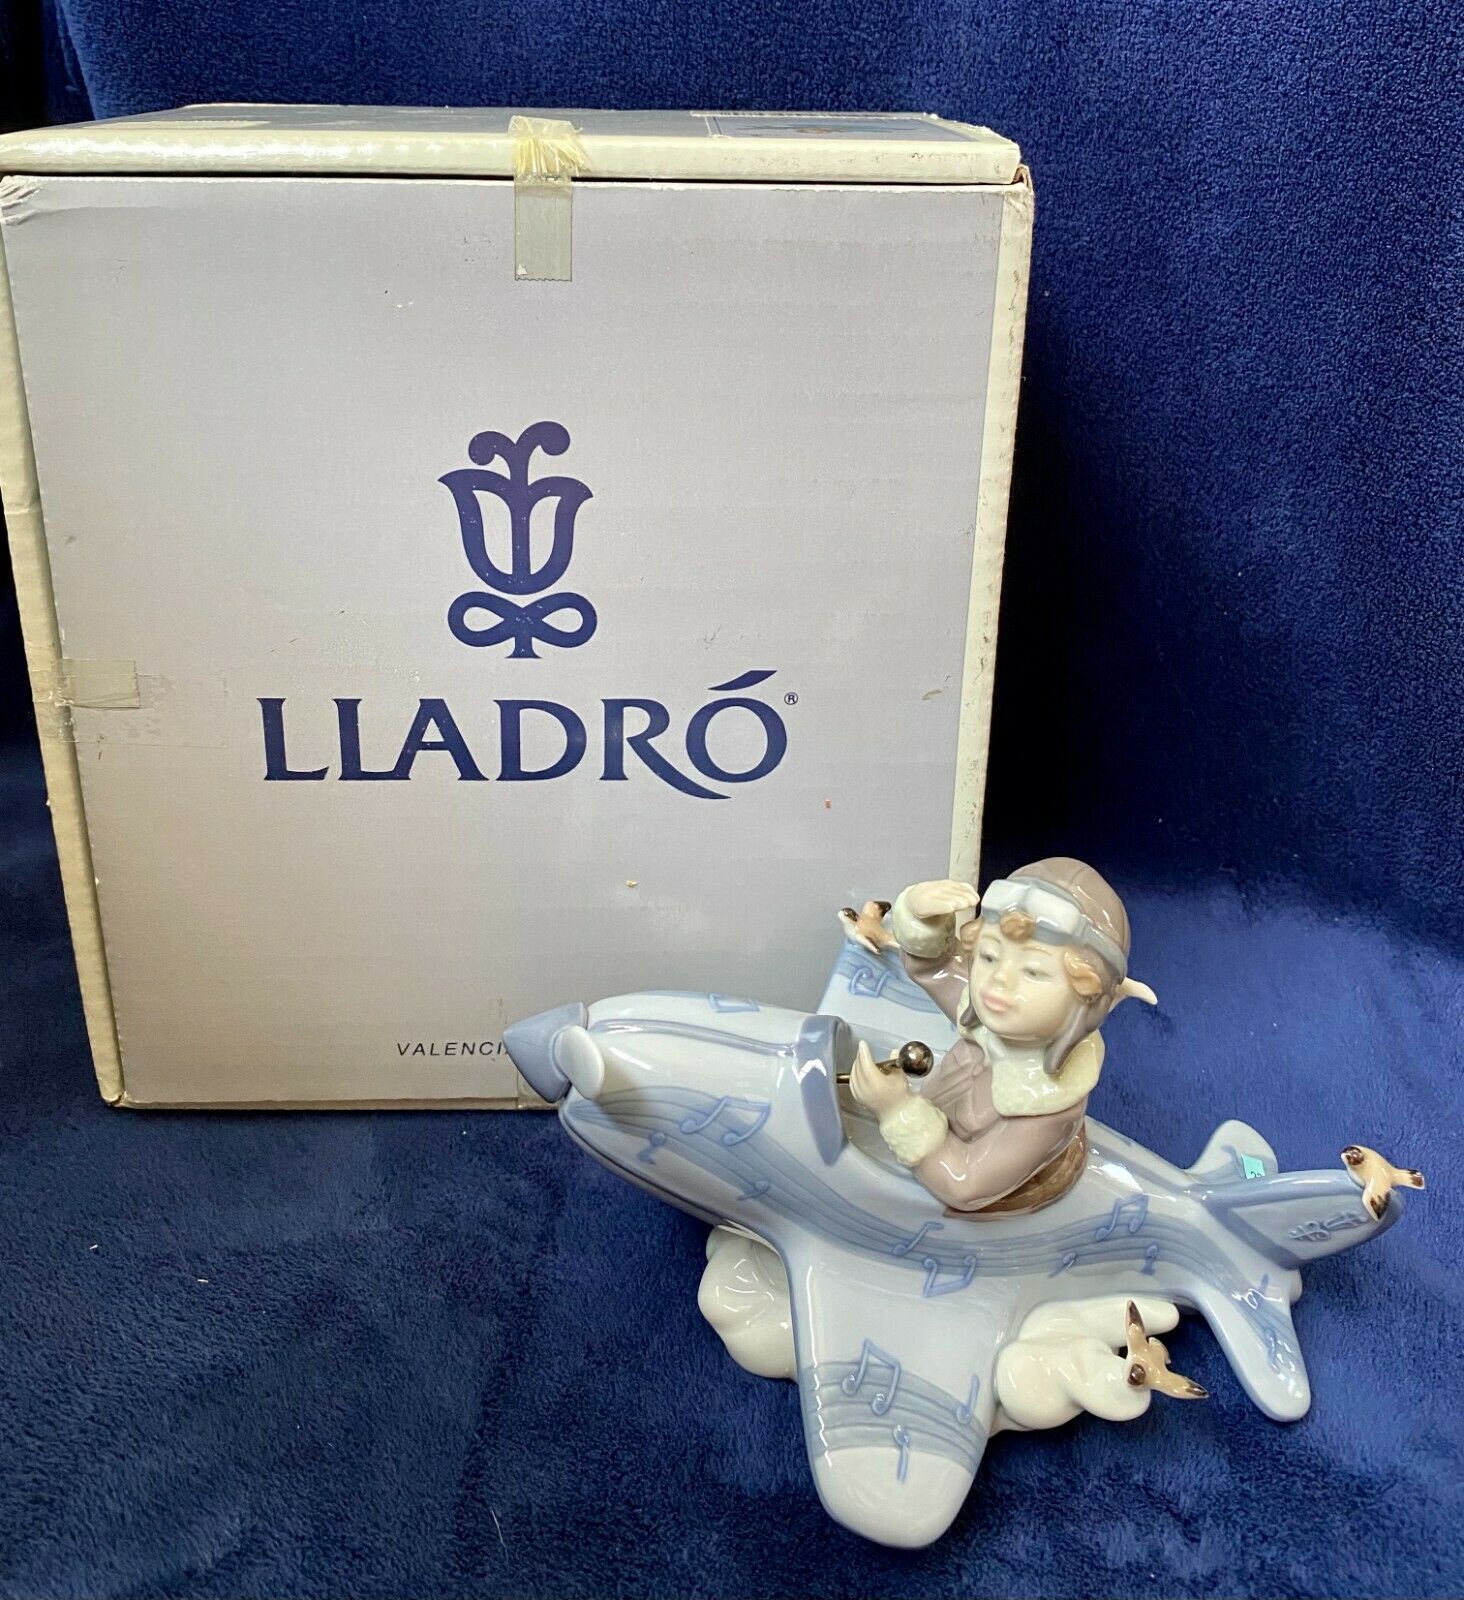 Lladro Over the Clouds Item # 5697 RETIRED Mint cond w/ box Pilot